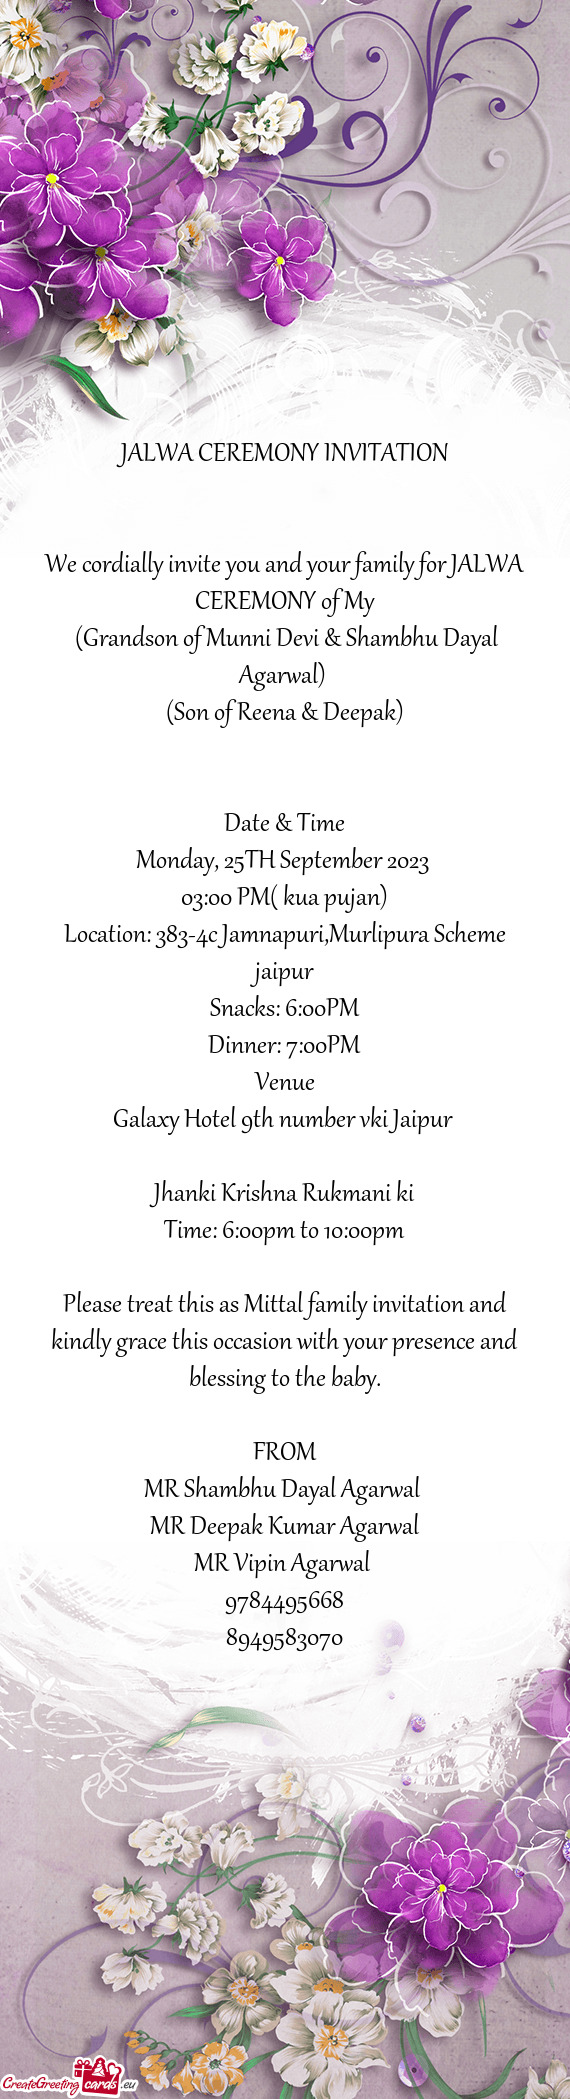 We cordially invite you and your family for JALWA CEREMONY of My